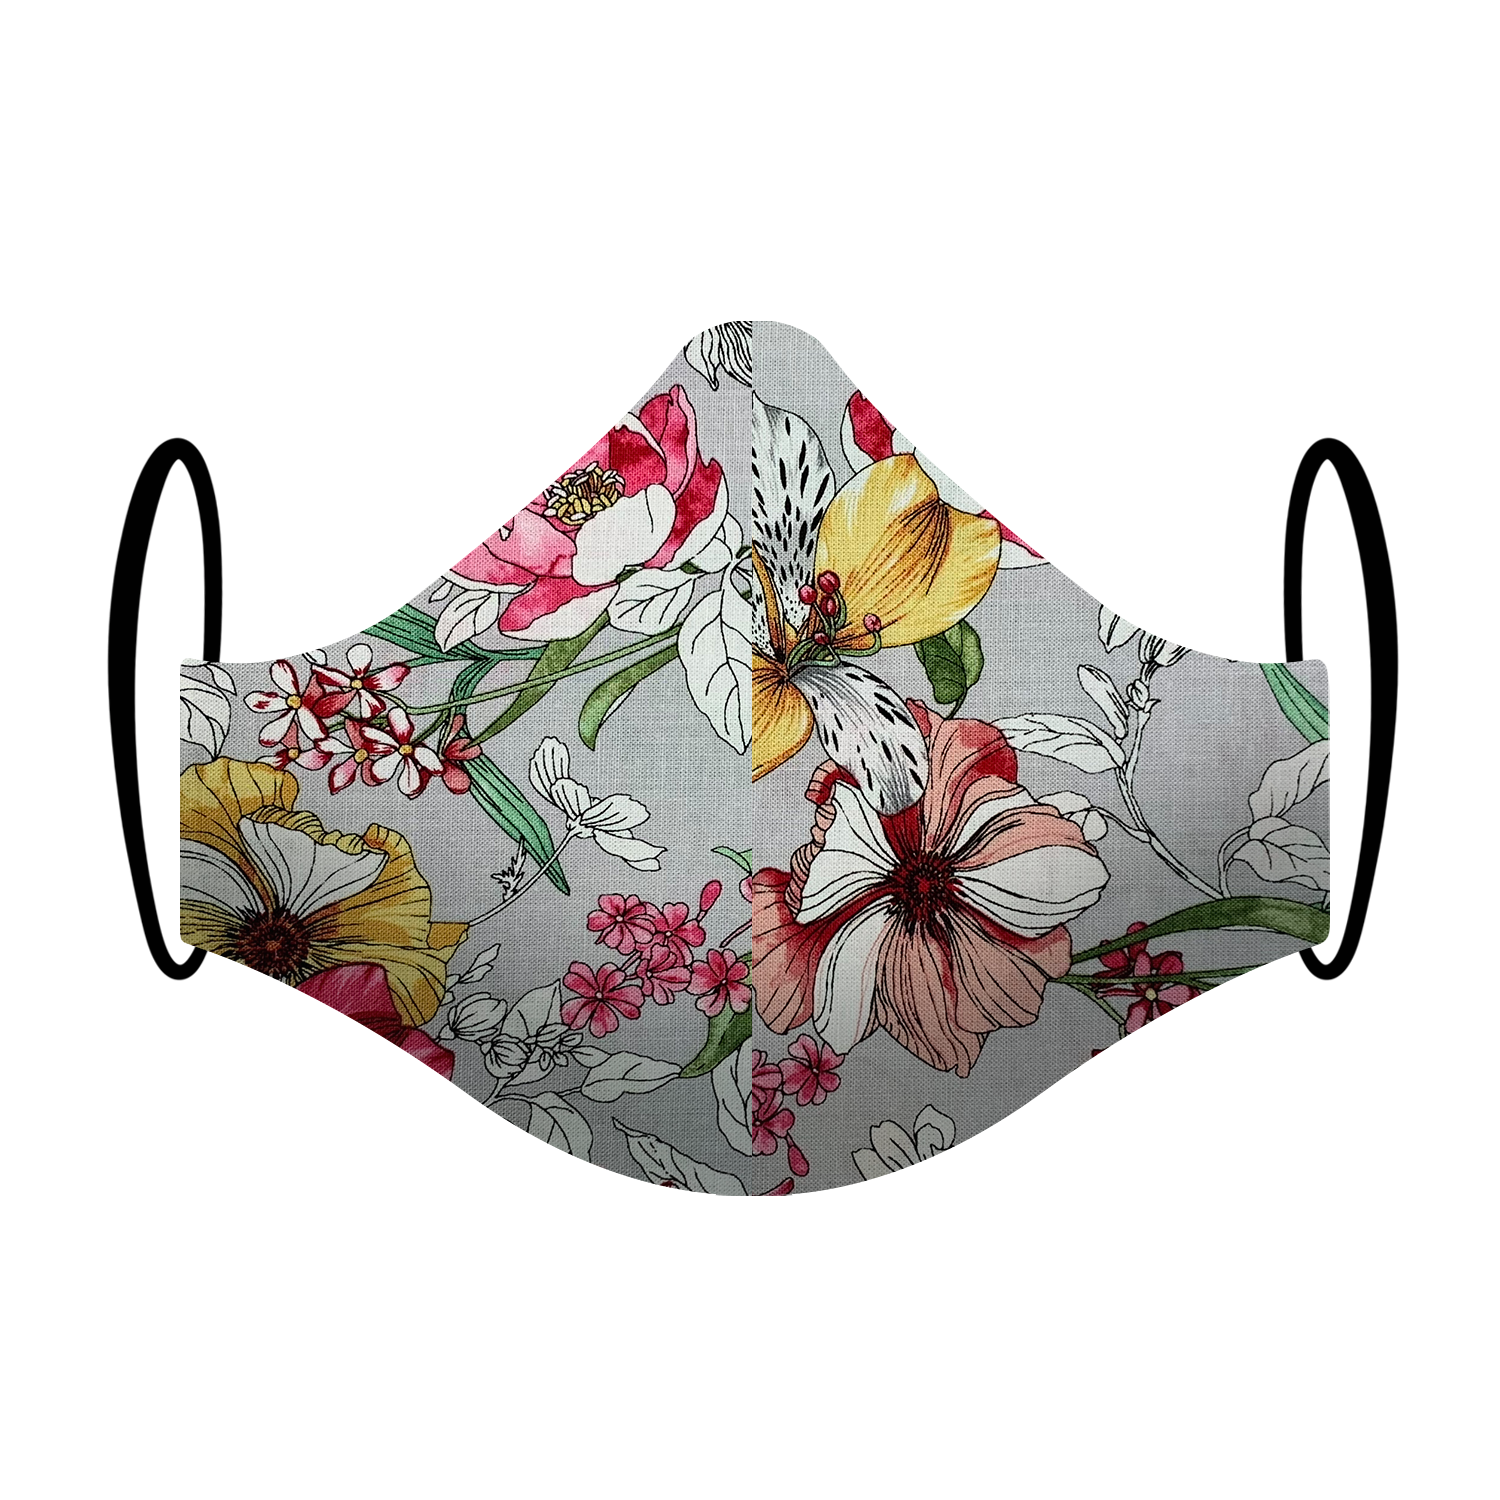 Triple layered face mask made in Melbourne Australia from cotton and poplin featuring a unique beautiful floral print